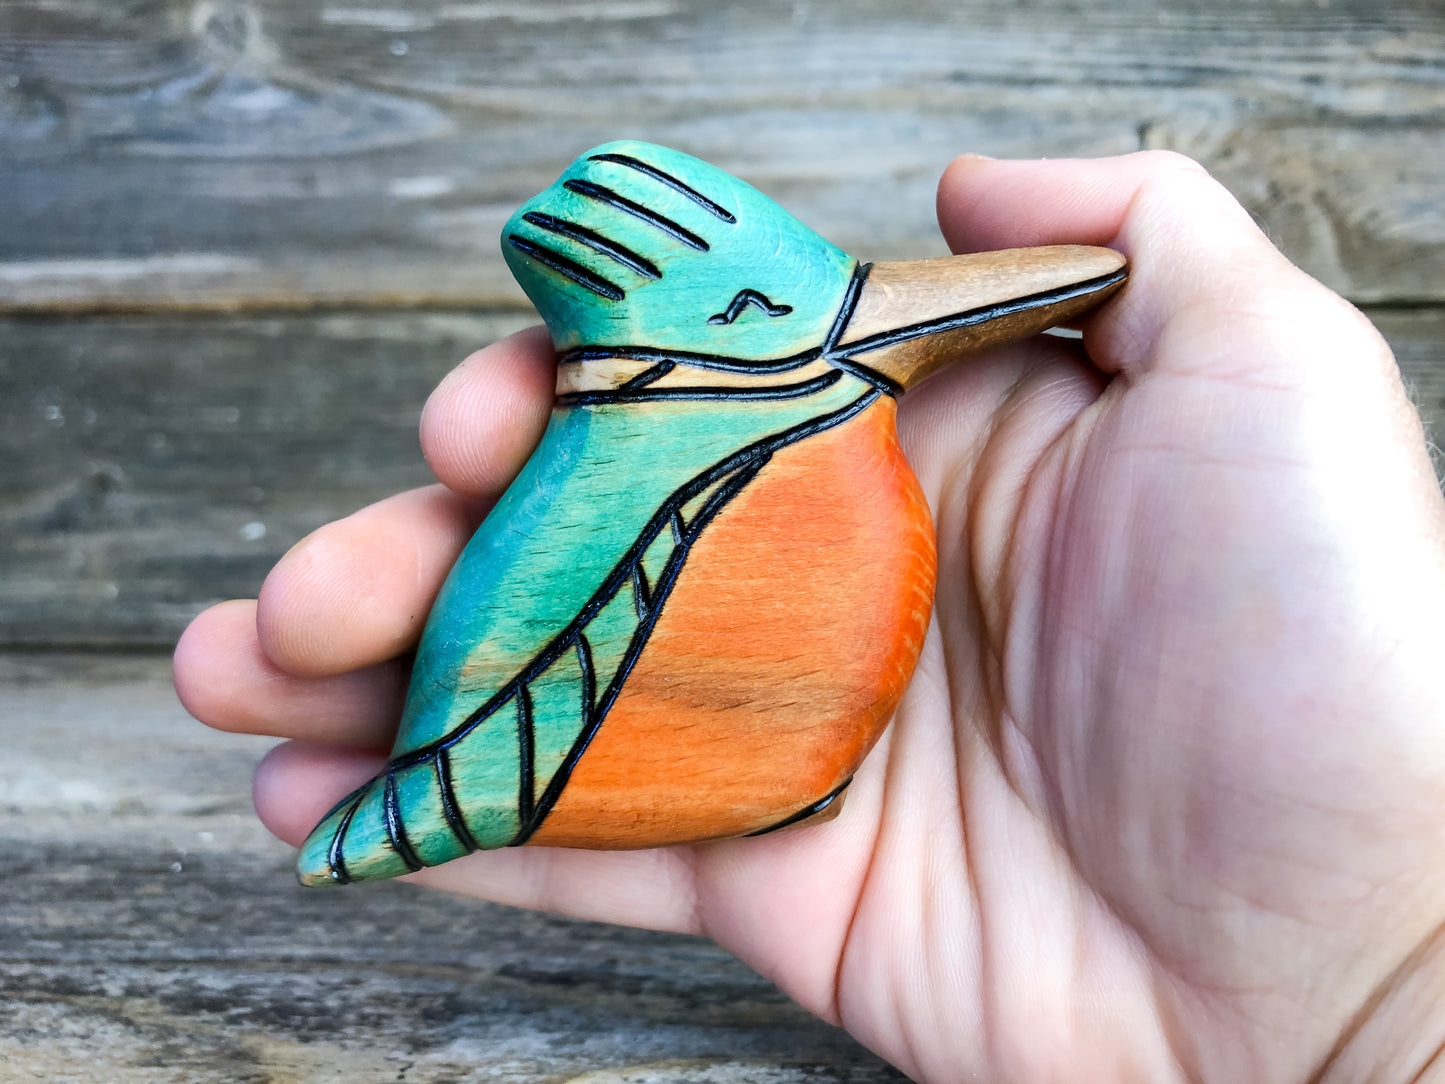 Wooden King Fisher Toy